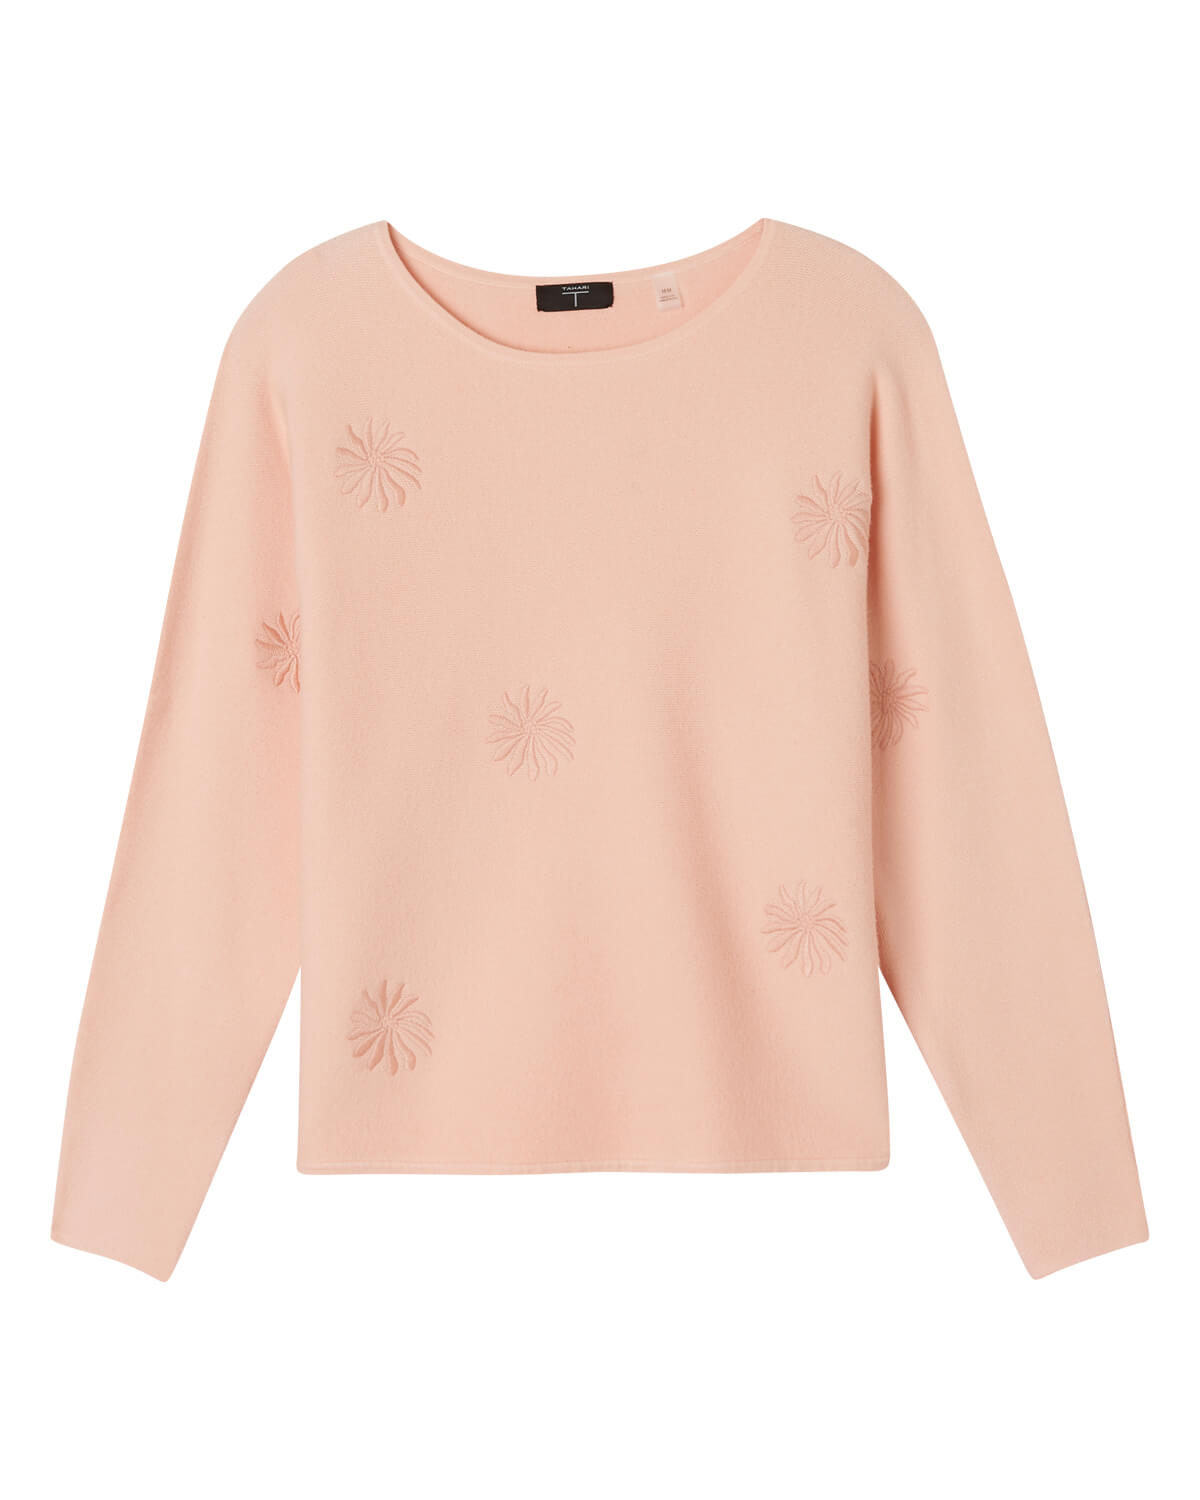 Boat Neck Embroidered Pullover Sweater | T Tahari | JANE + MERCER